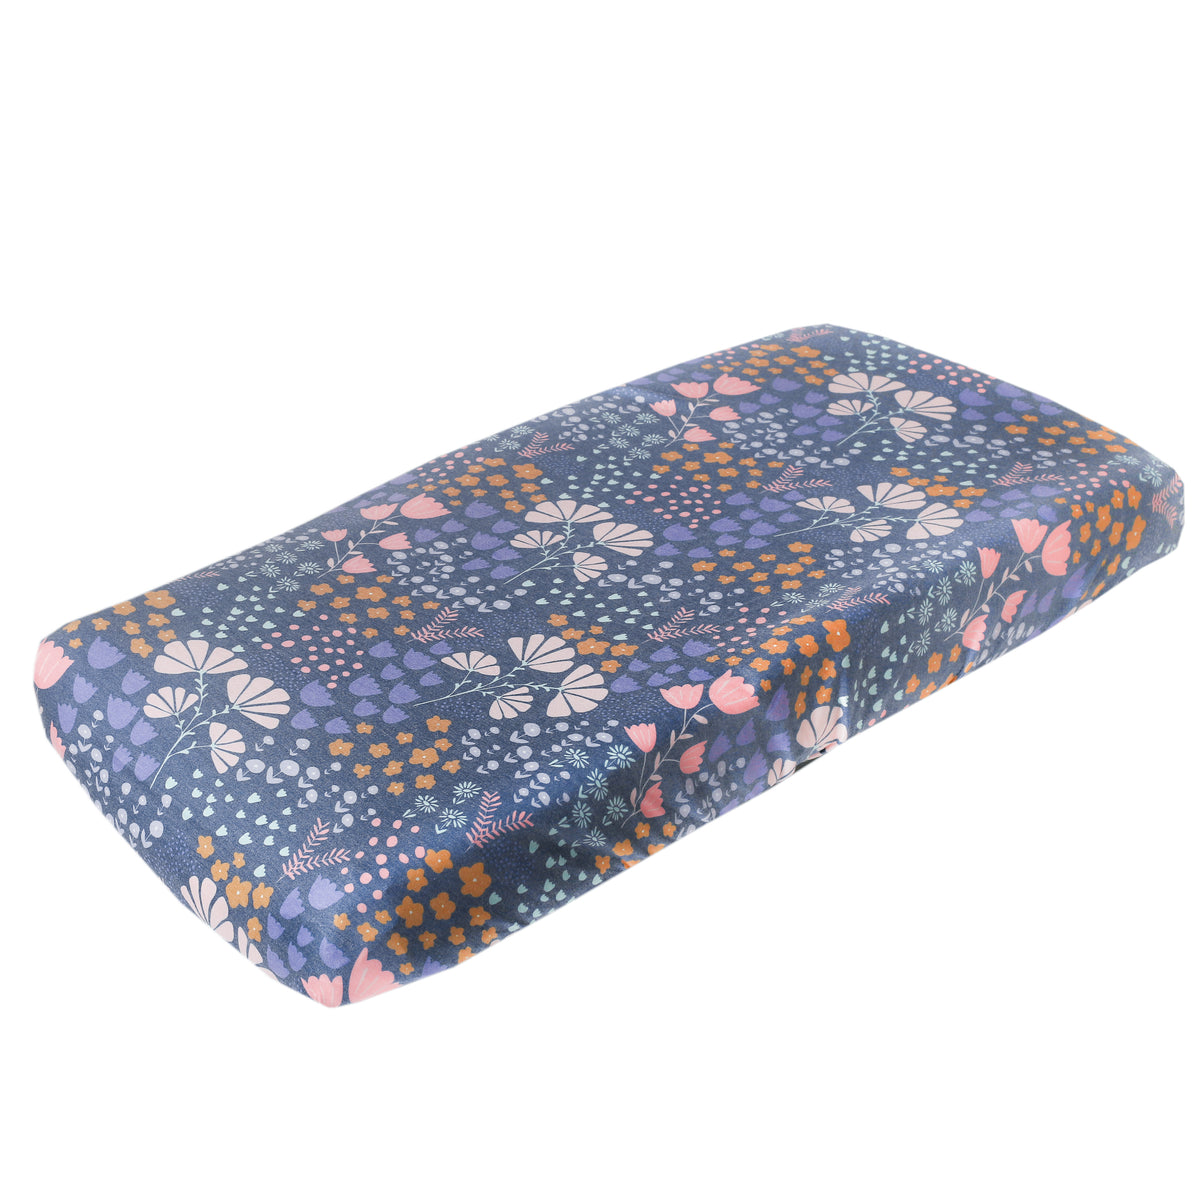 Premium Knit Diaper Changing Pad Cover - Meadow